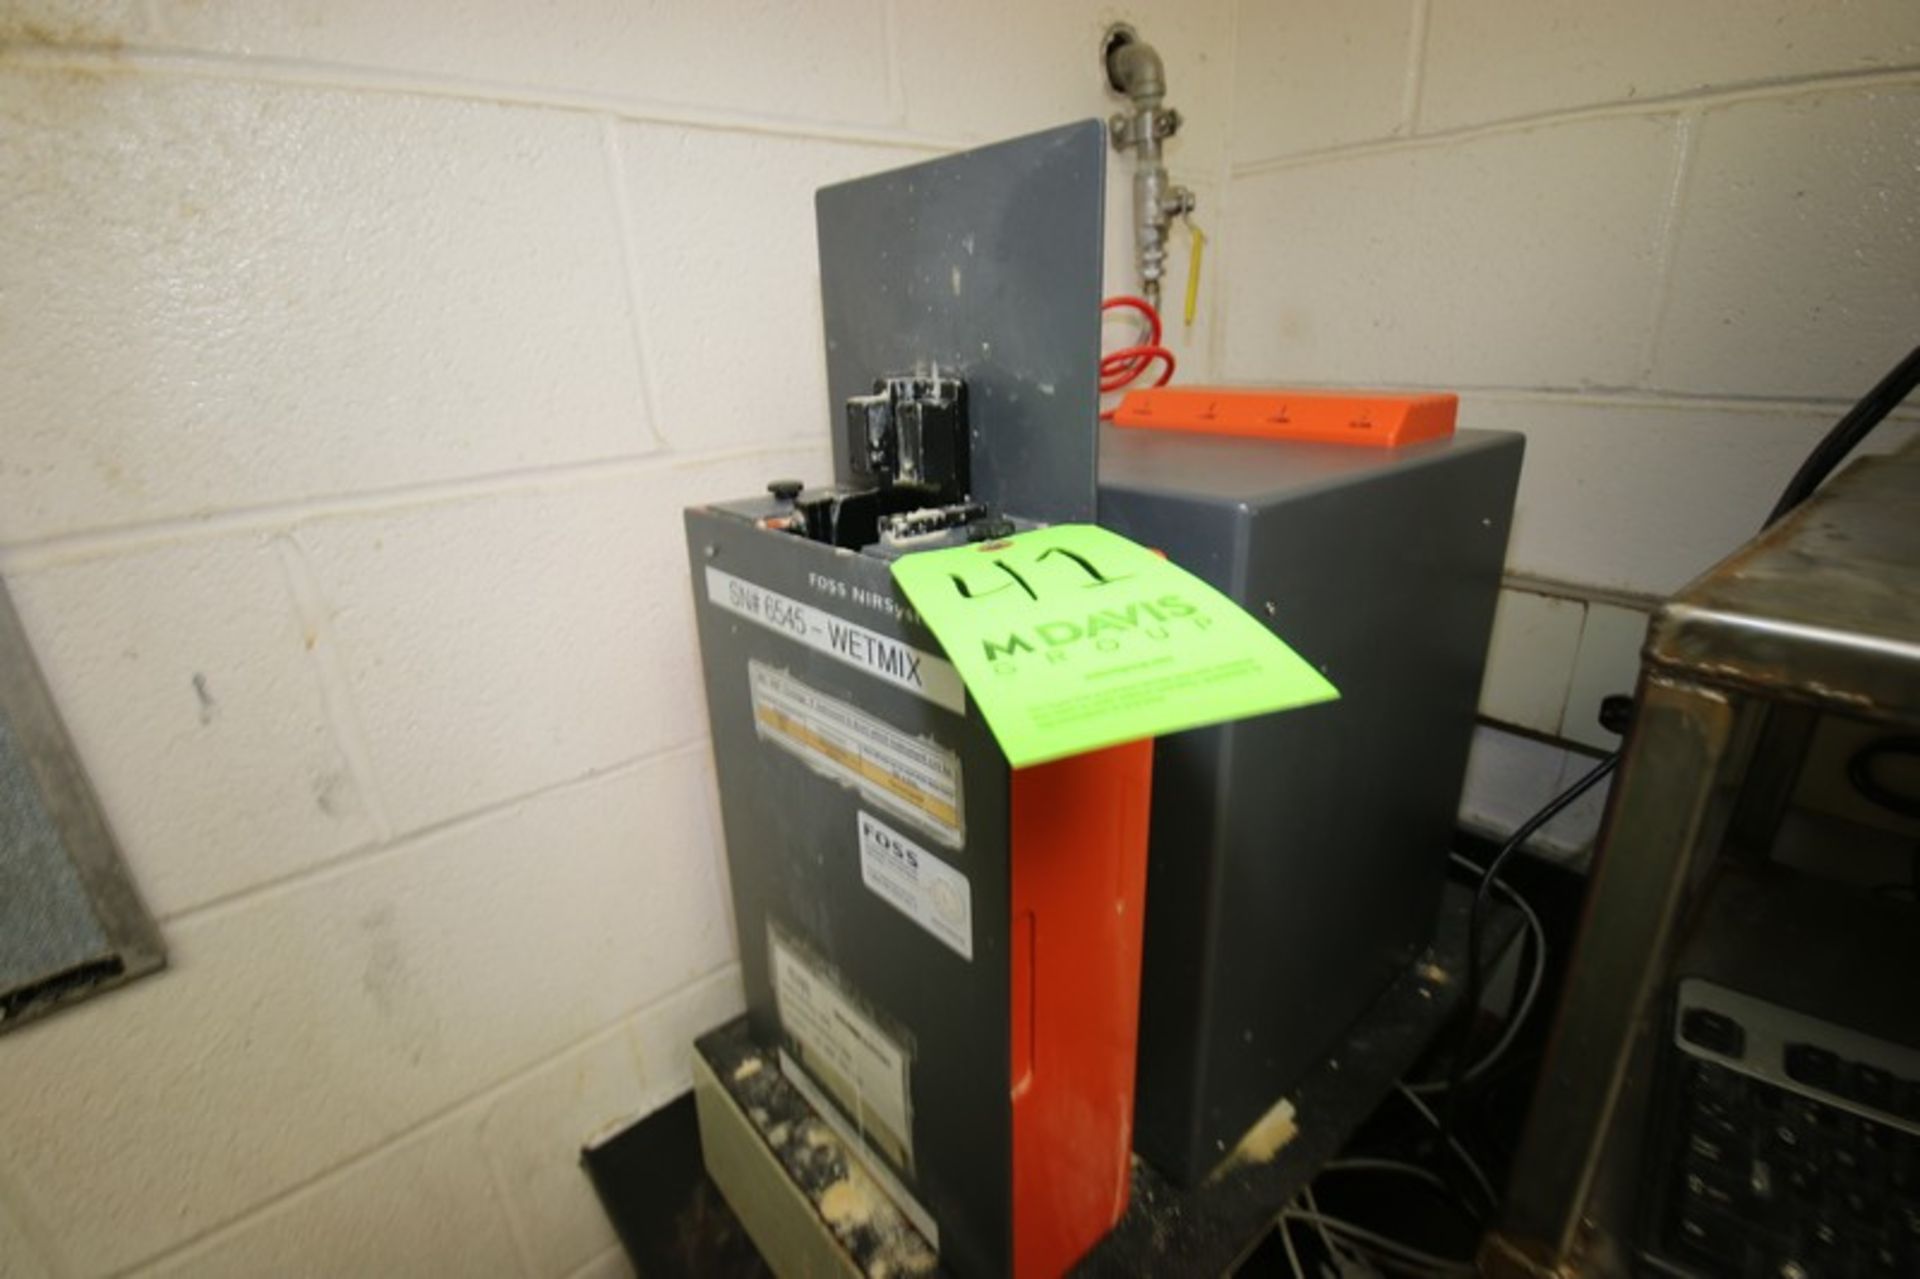 Foss NIRSystems Analyzer, M/N 6500-M, S/N 6545, 100-240 Volts (INV#82385)(LOCATED @ MDG AUCTION - Image 2 of 9